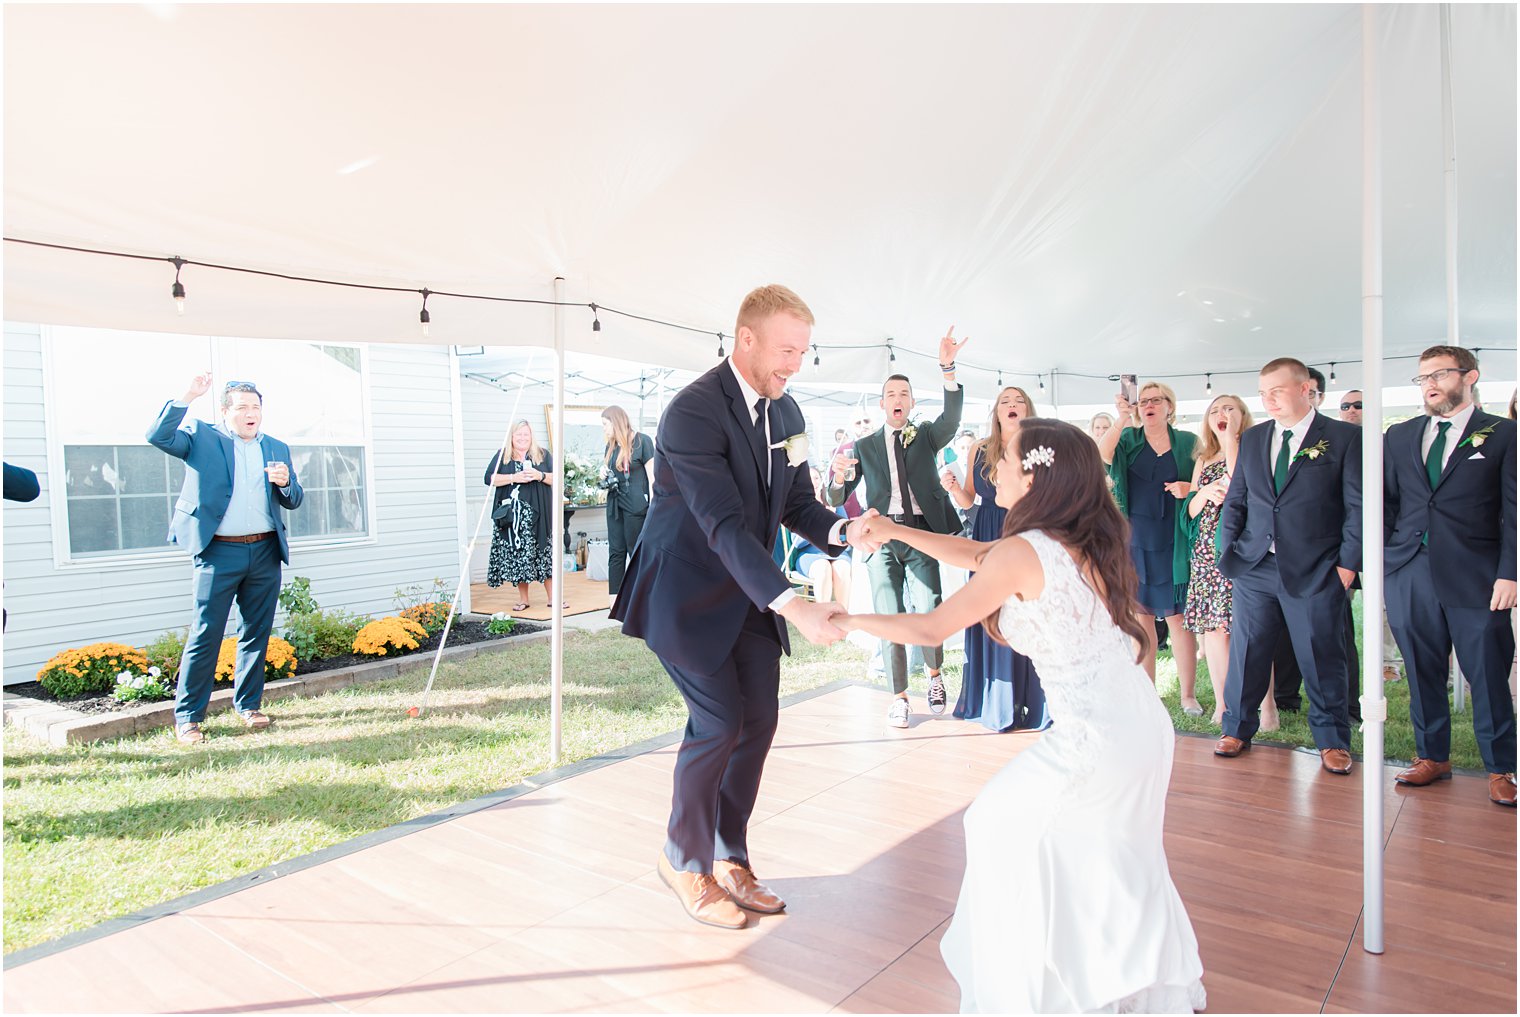 bride and groom dance under tent at wedding reception